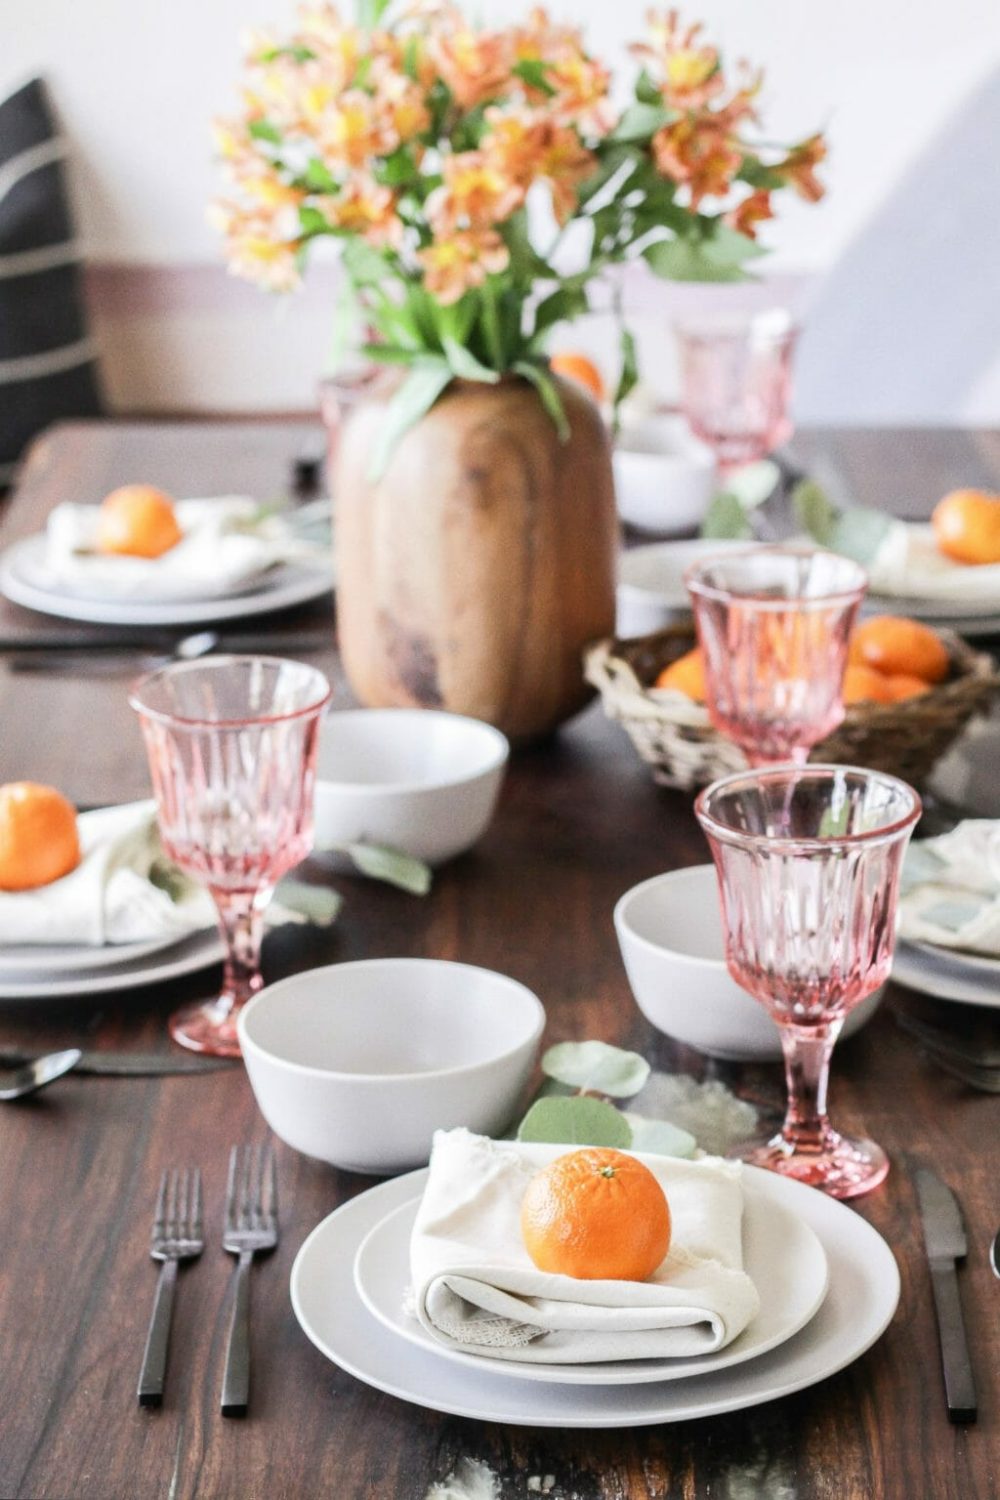 A table setting with fresh oranges on plates